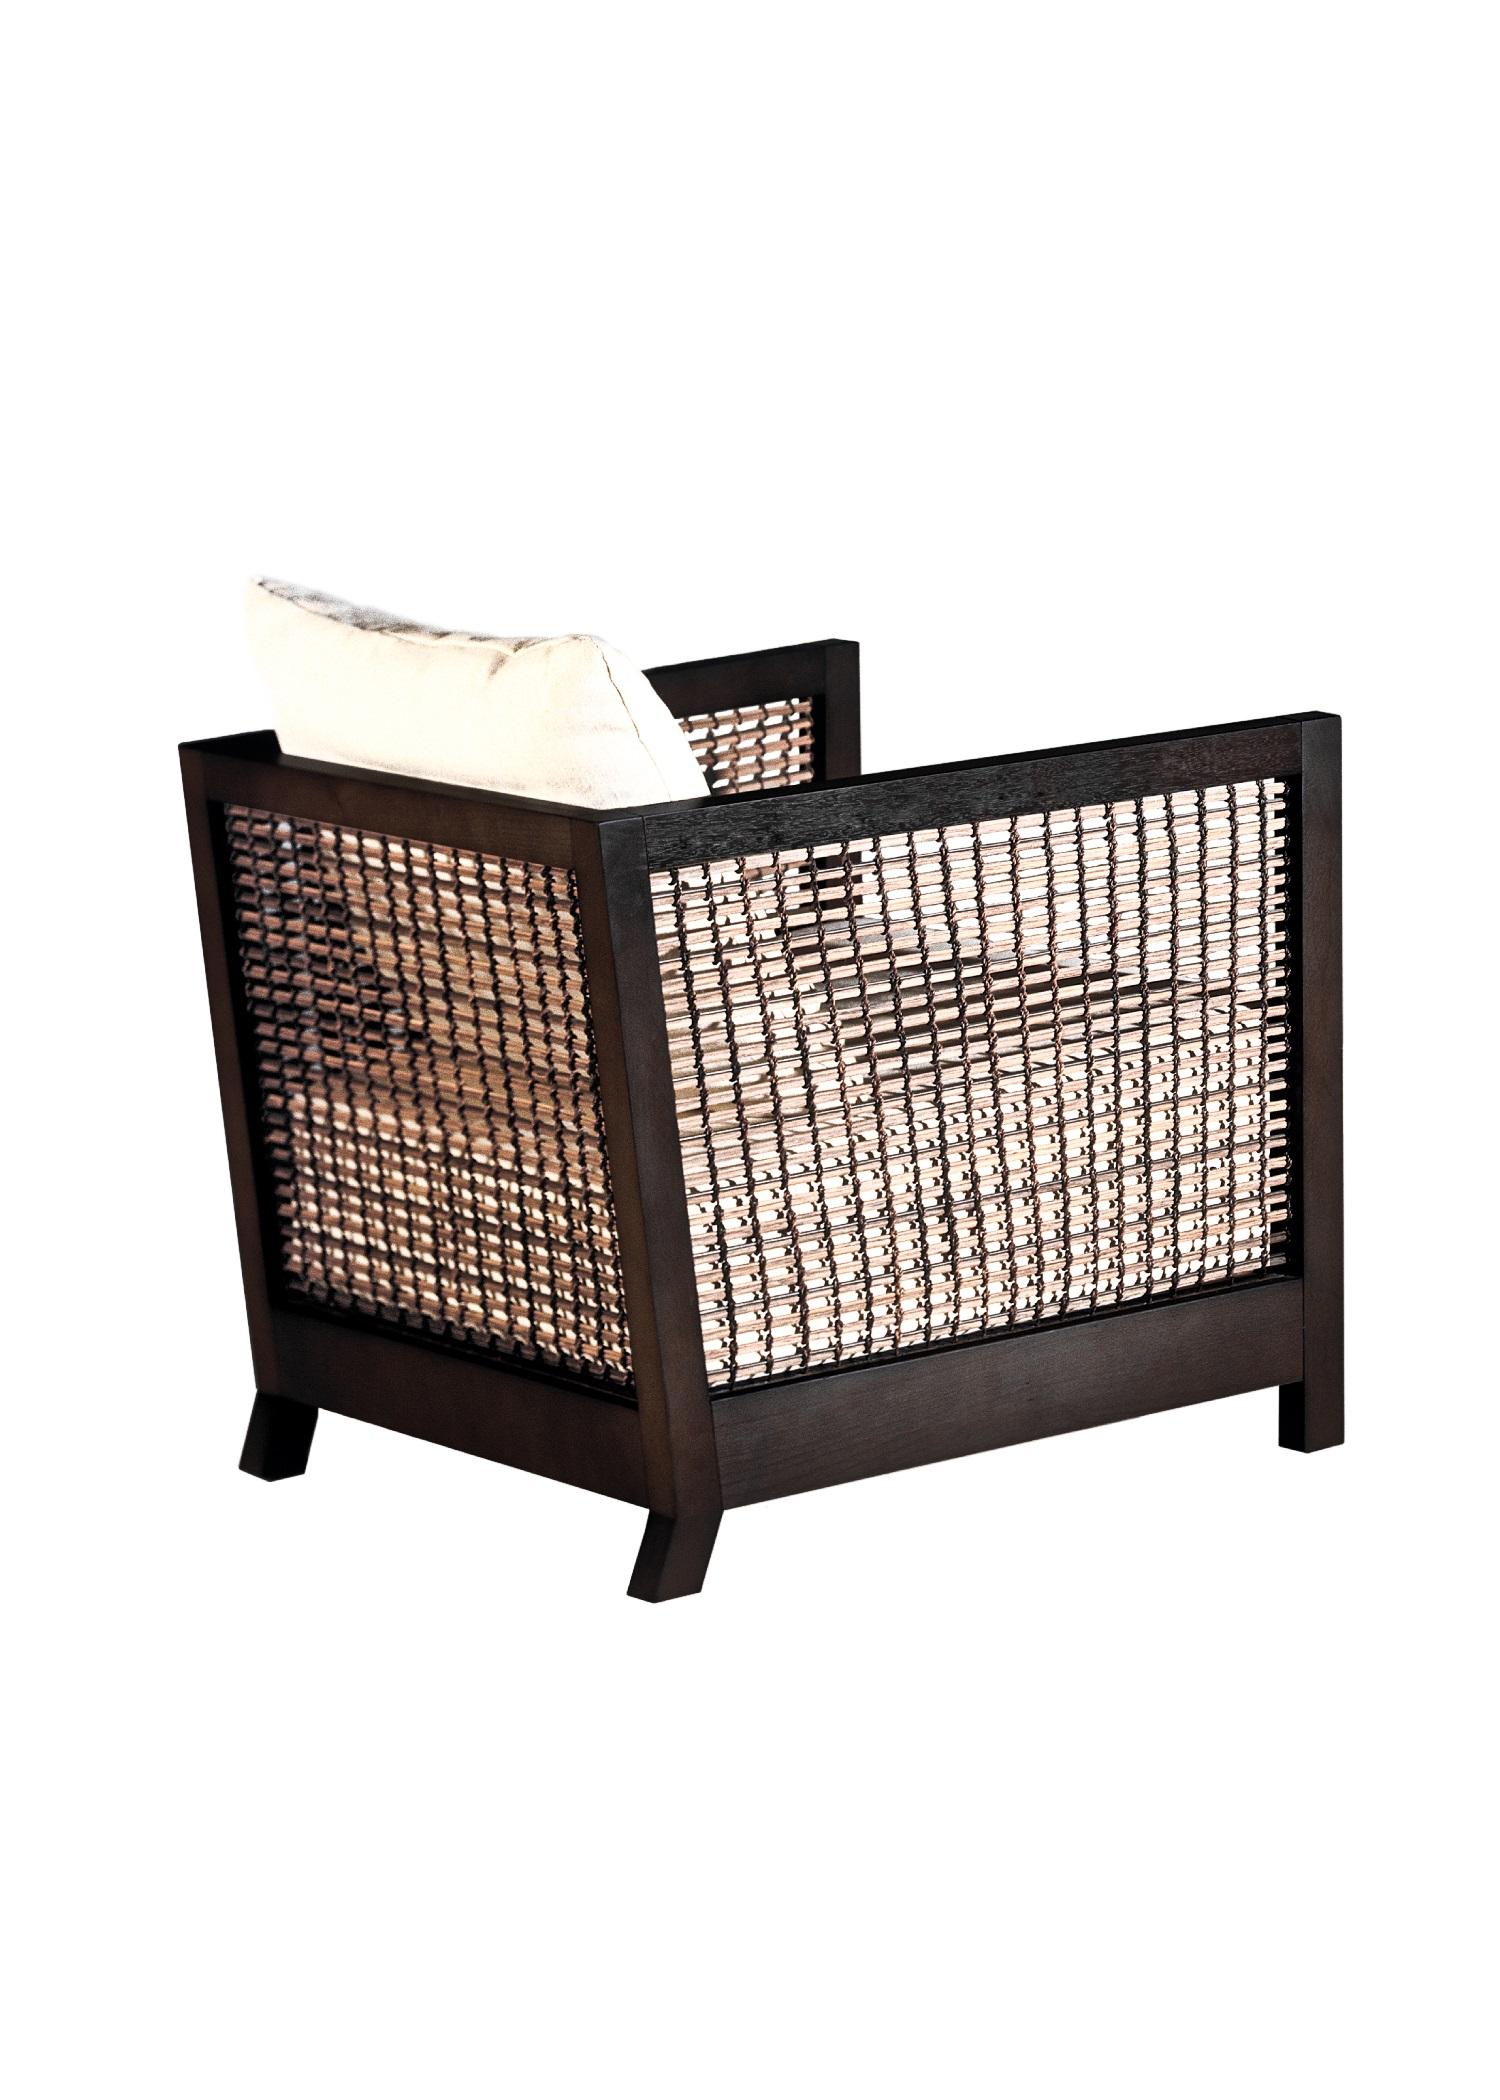 Walnut lowback suzy wong easy armchair by Kenneth Cobonpue.
Materials: Lampakanai, rattan, walnut. 
Also available in maple.
Dimensions: 76 cm x 71 cm x H 64 cm

Woven panels create a feeling of intimacy as you and your guests indulge in